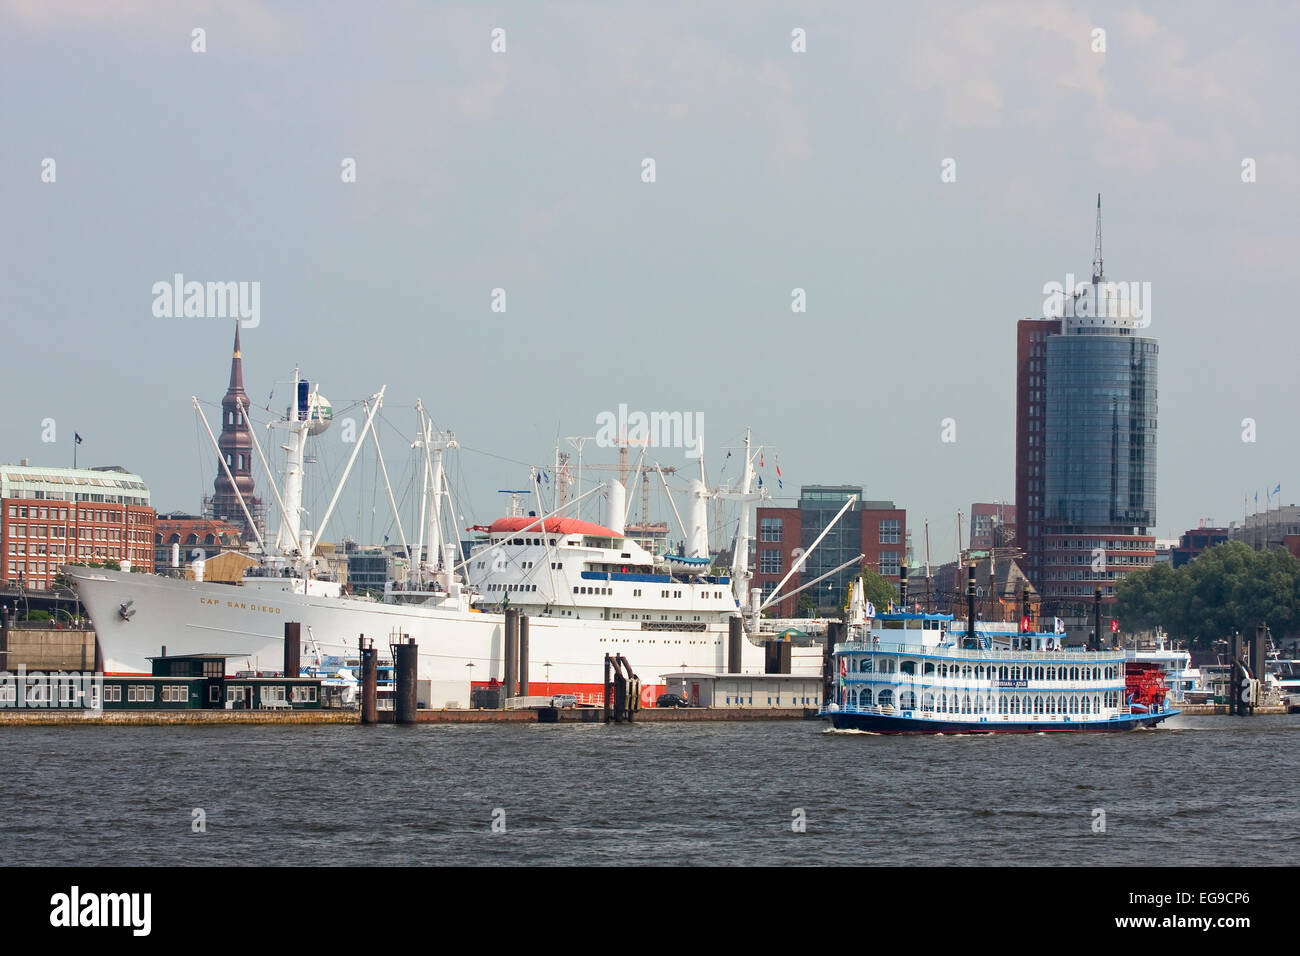 About pier with a museum ship Cap San Diego, in the background Hanseatic Trade Center, Hamburg, Germany, Europe Stock Photo